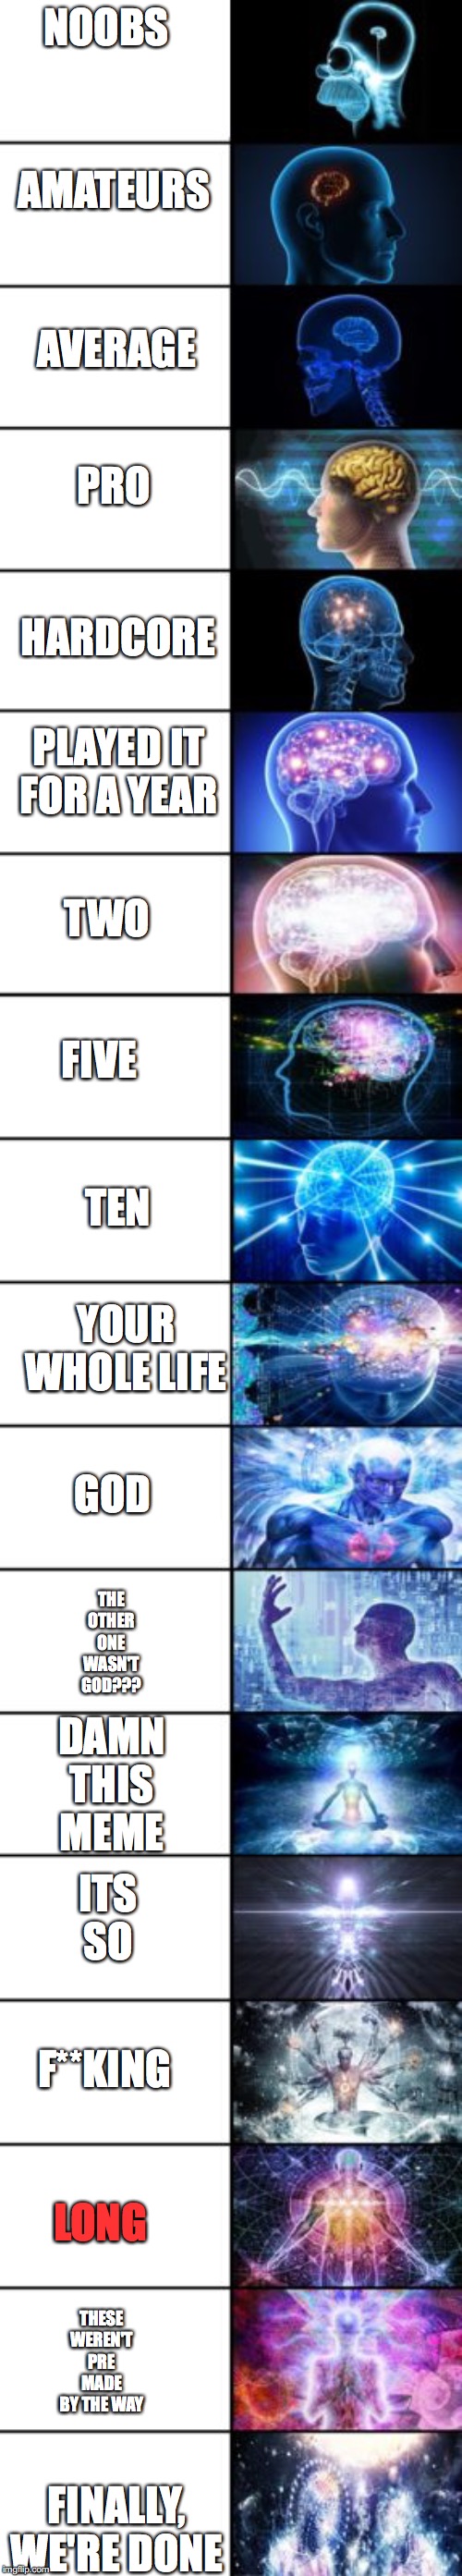 Expanding Brain longest version | AMATEURS; NOOBS; AVERAGE; HARDCORE; PRO; TWO; PLAYED IT FOR A YEAR; FIVE; TEN; GOD; YOUR WHOLE LIFE; THE OTHER ONE WASN'T GOD??? DAMN THIS MEME; ITS SO; F**KING; LONG; FINALLY, WE'RE DONE; THESE WEREN'T PRE MADE BY THE WAY | image tagged in expanding brain longest version | made w/ Imgflip meme maker